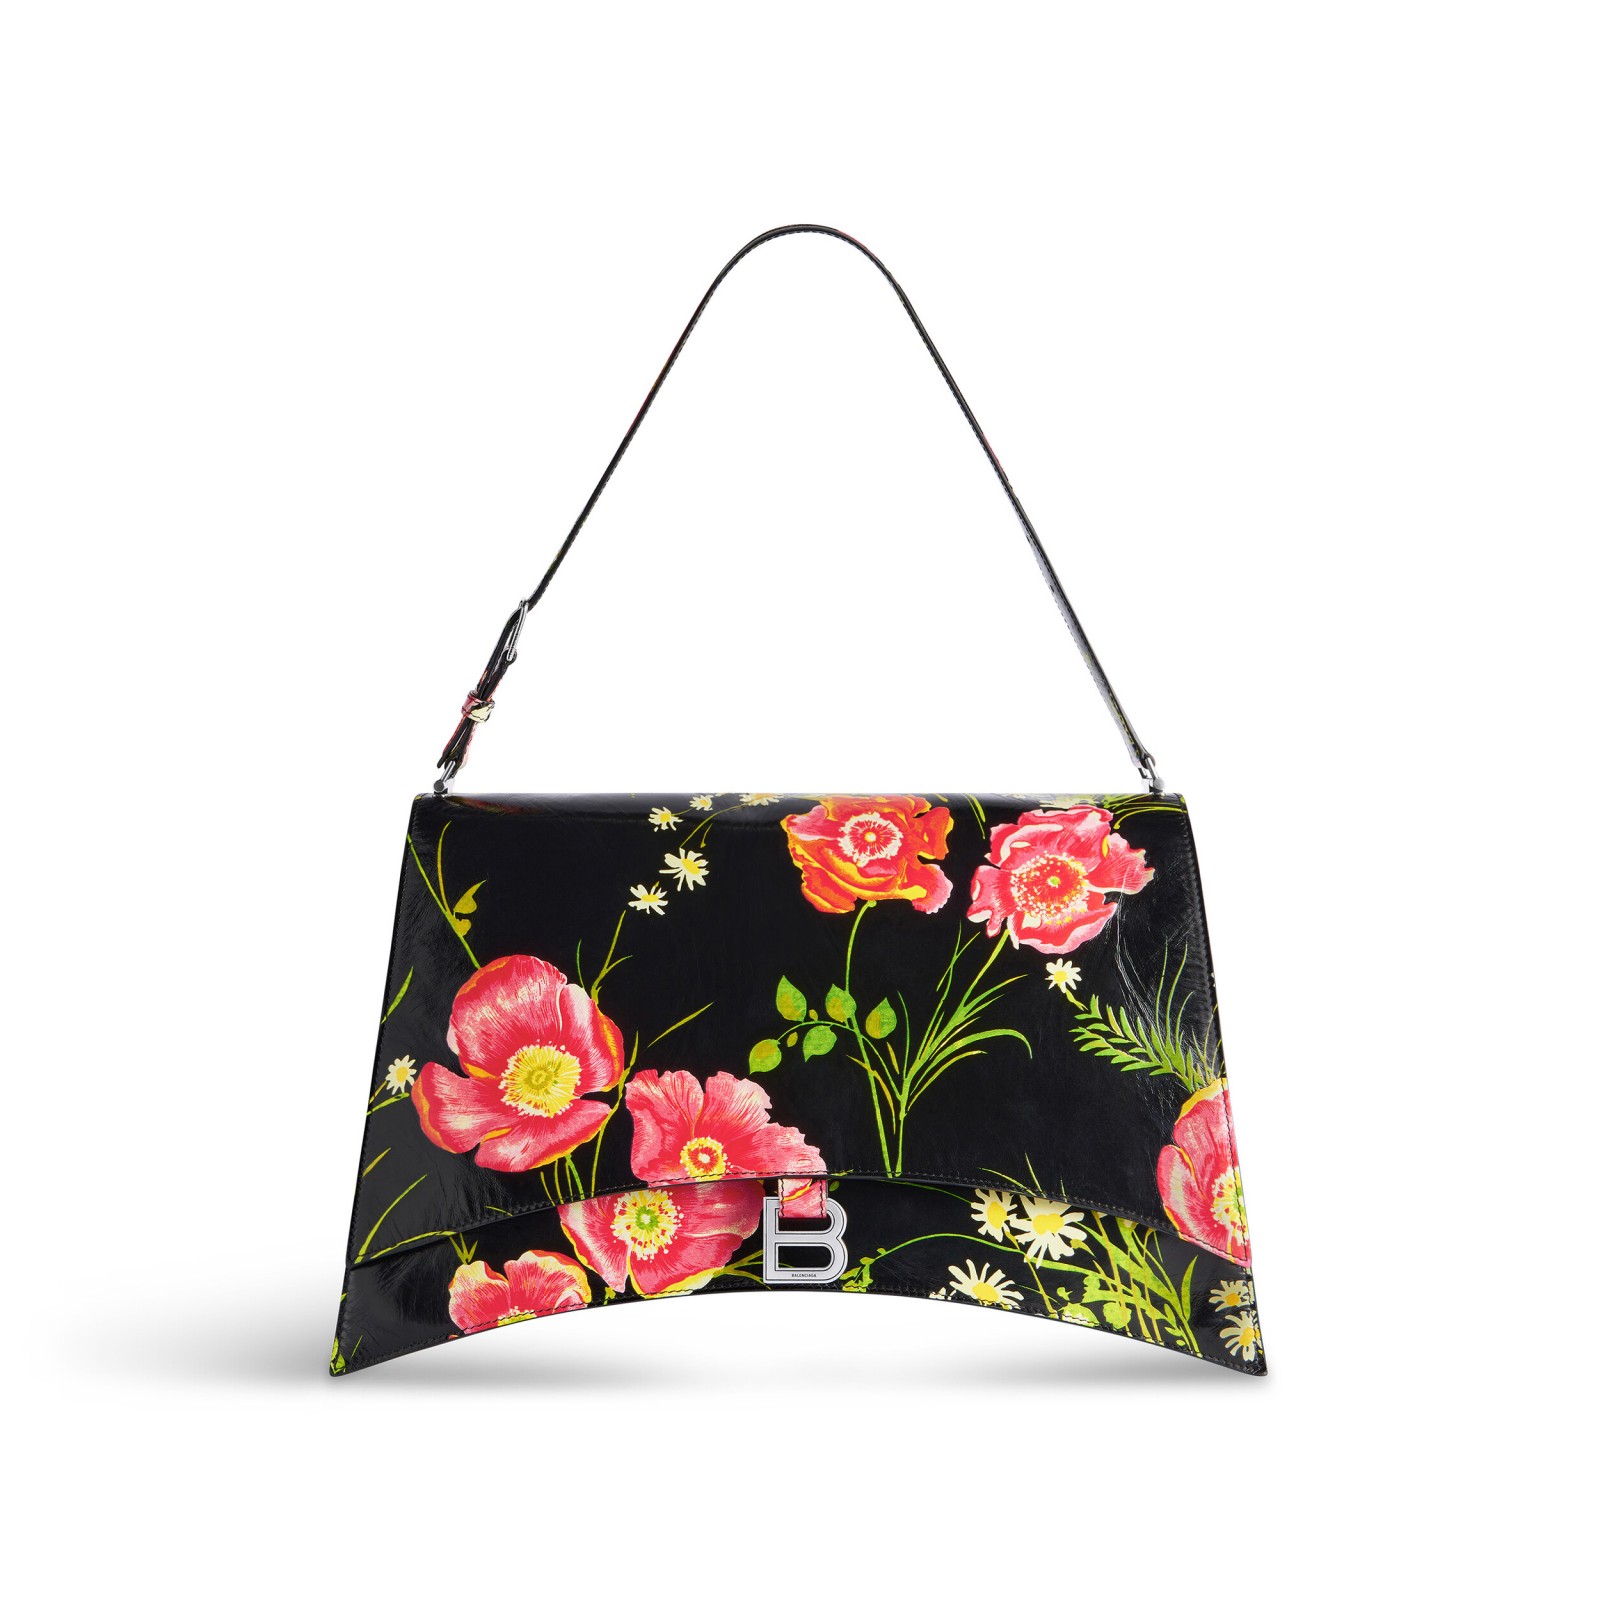 CRUSH LARGE SLING BAG WITH POPPY PRINT